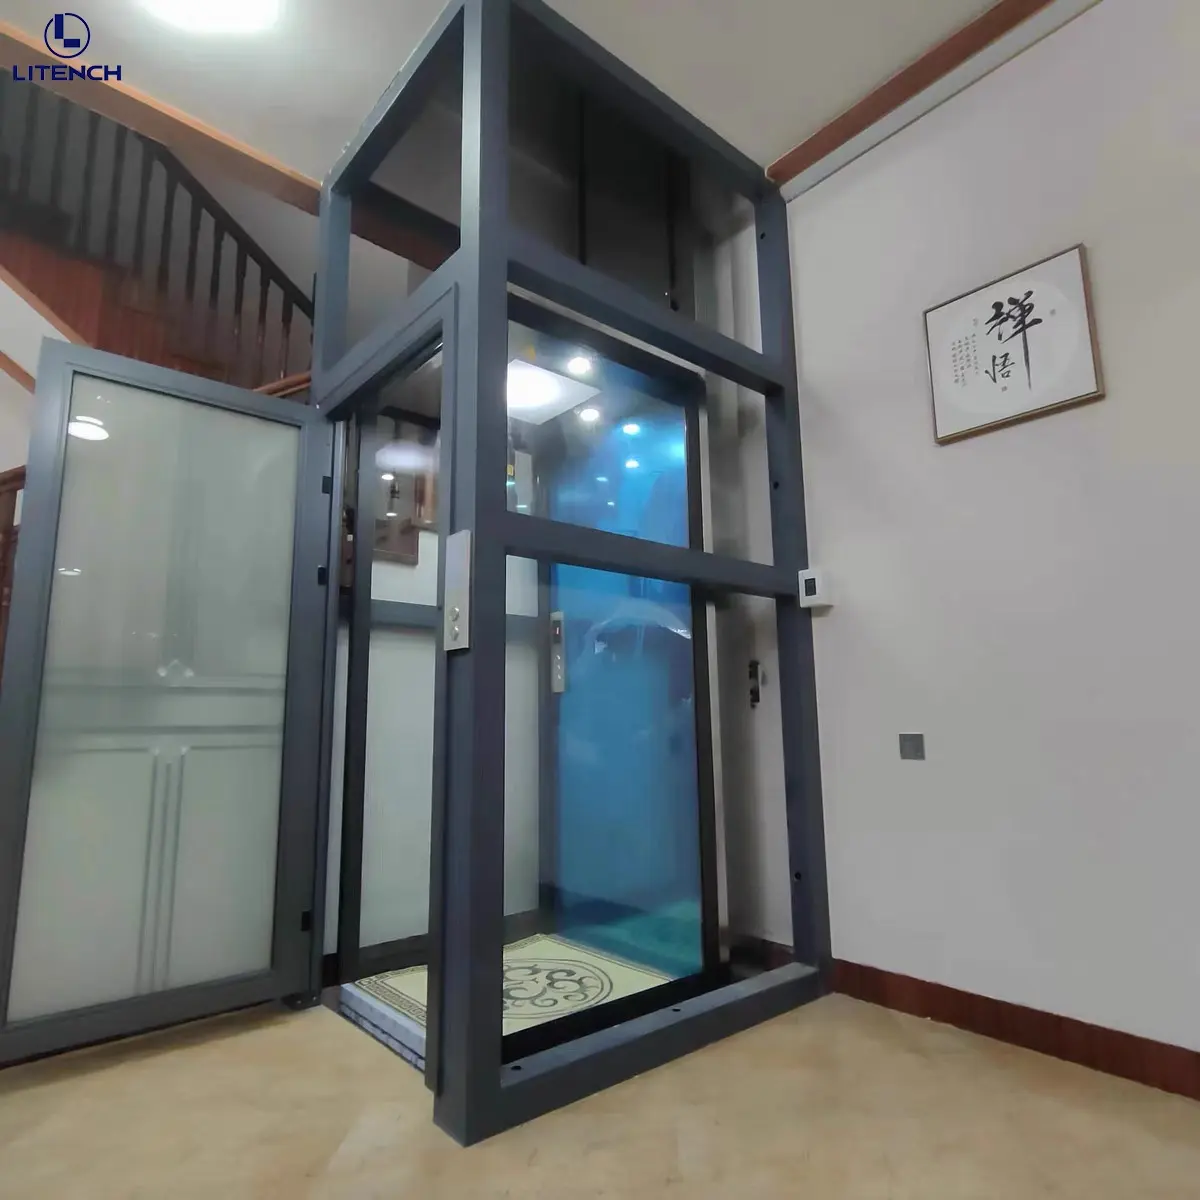 Luxury Stainless Steel Cabin Home Lift 3 Floors House Residential Elevator For Person